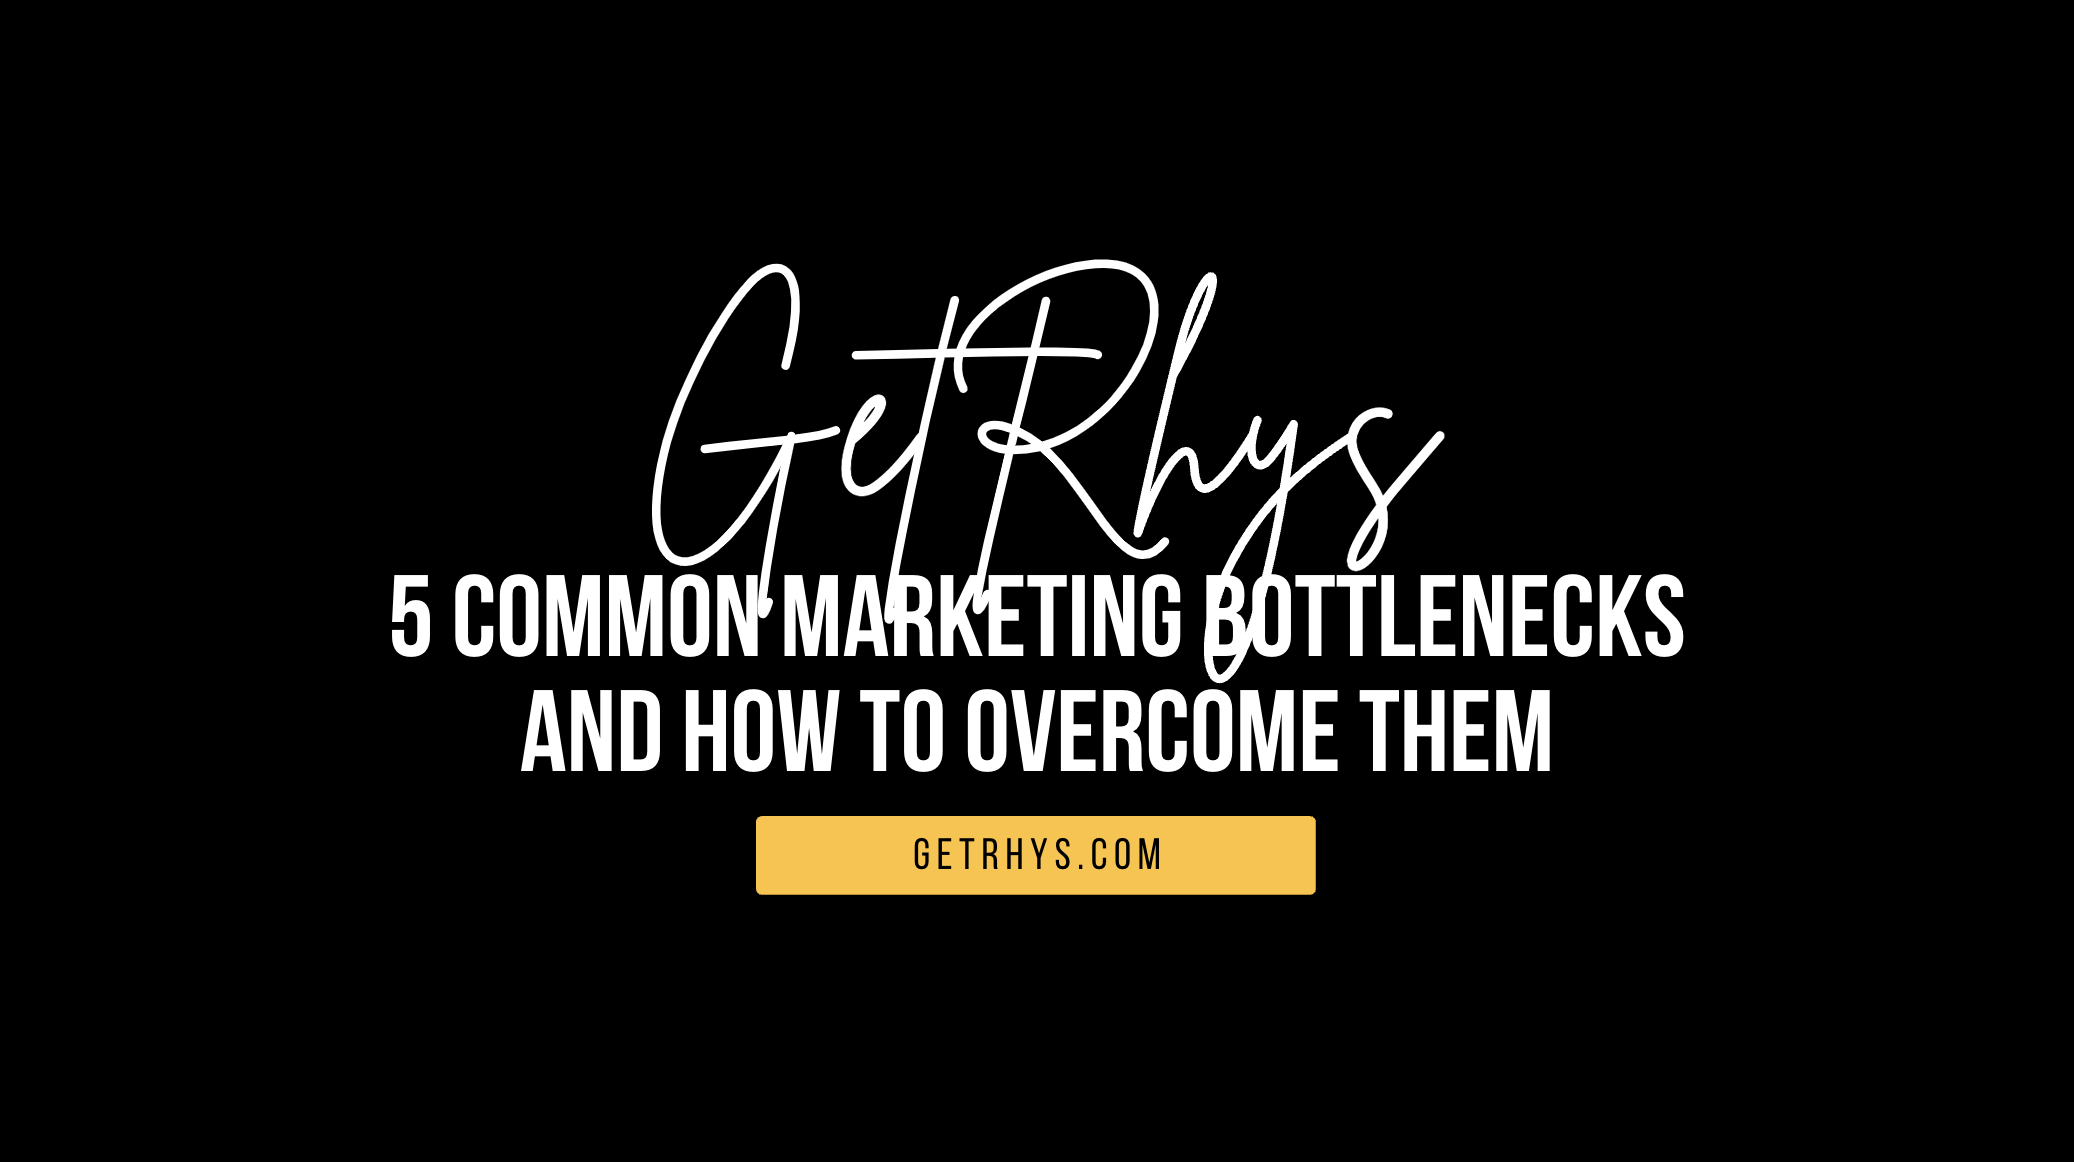 5 Common Marketing Bottlenecks and How to Overcome Them